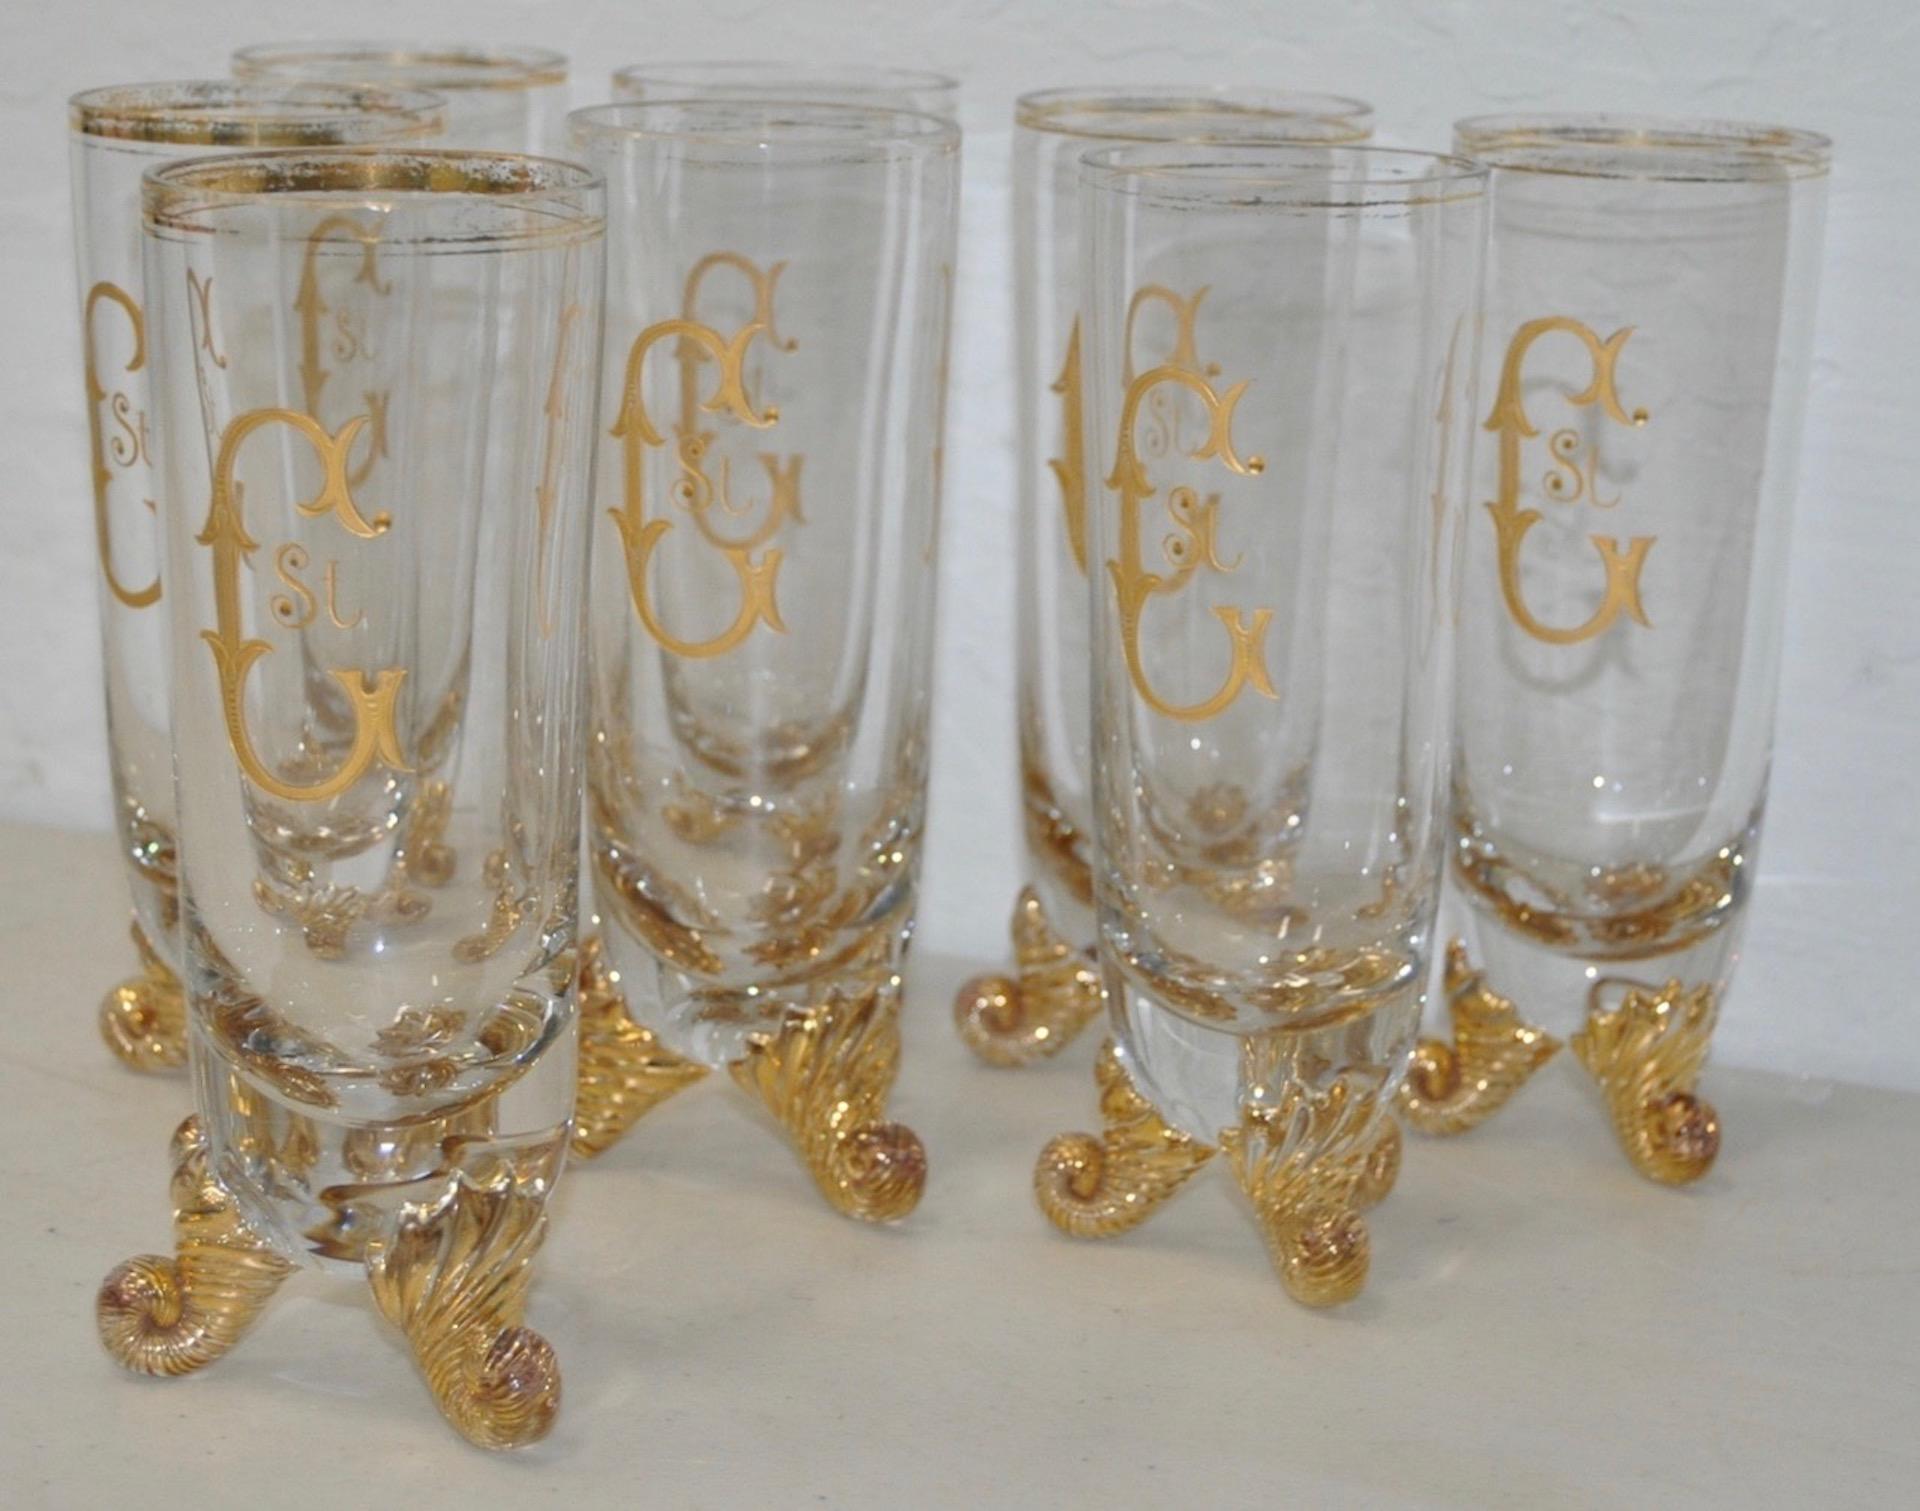 Set of eight hand blown and gilded venetian glasses

Fantastic set of hand painted bar glasses.

Each glass measures 2.5